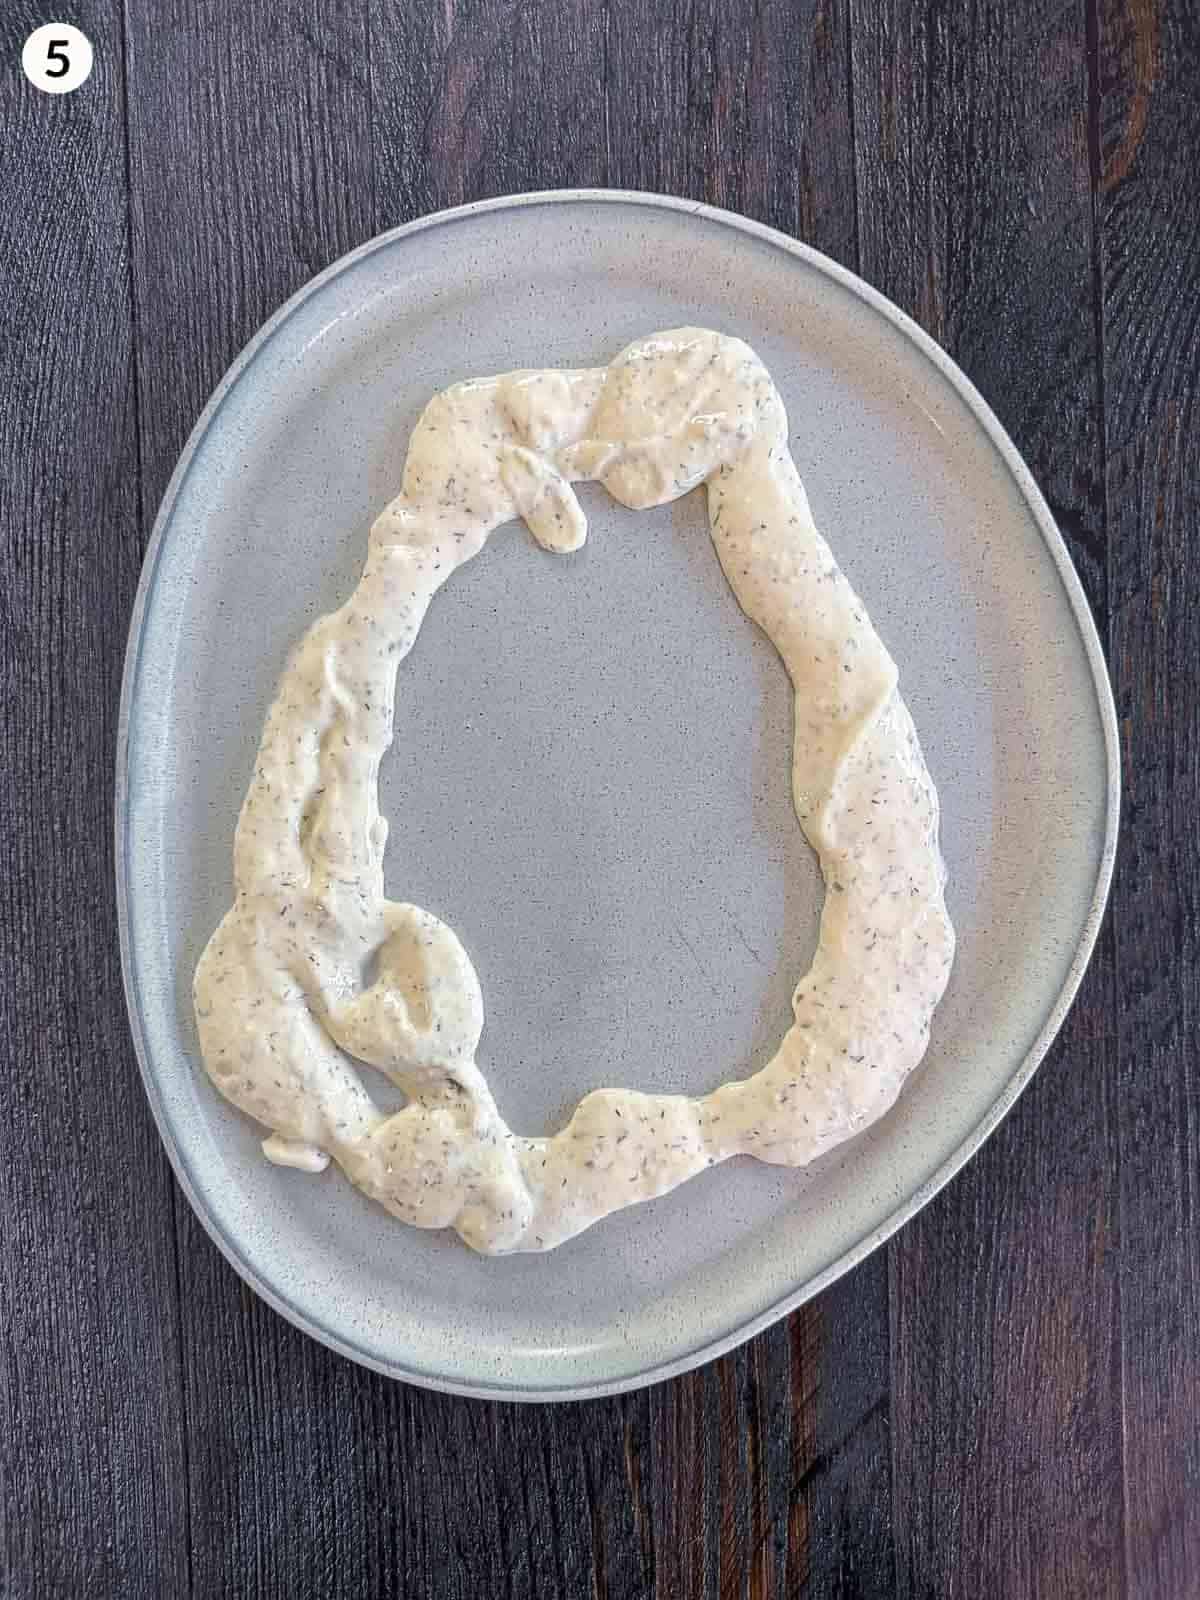 Adding tzatziki in a circle on a plate